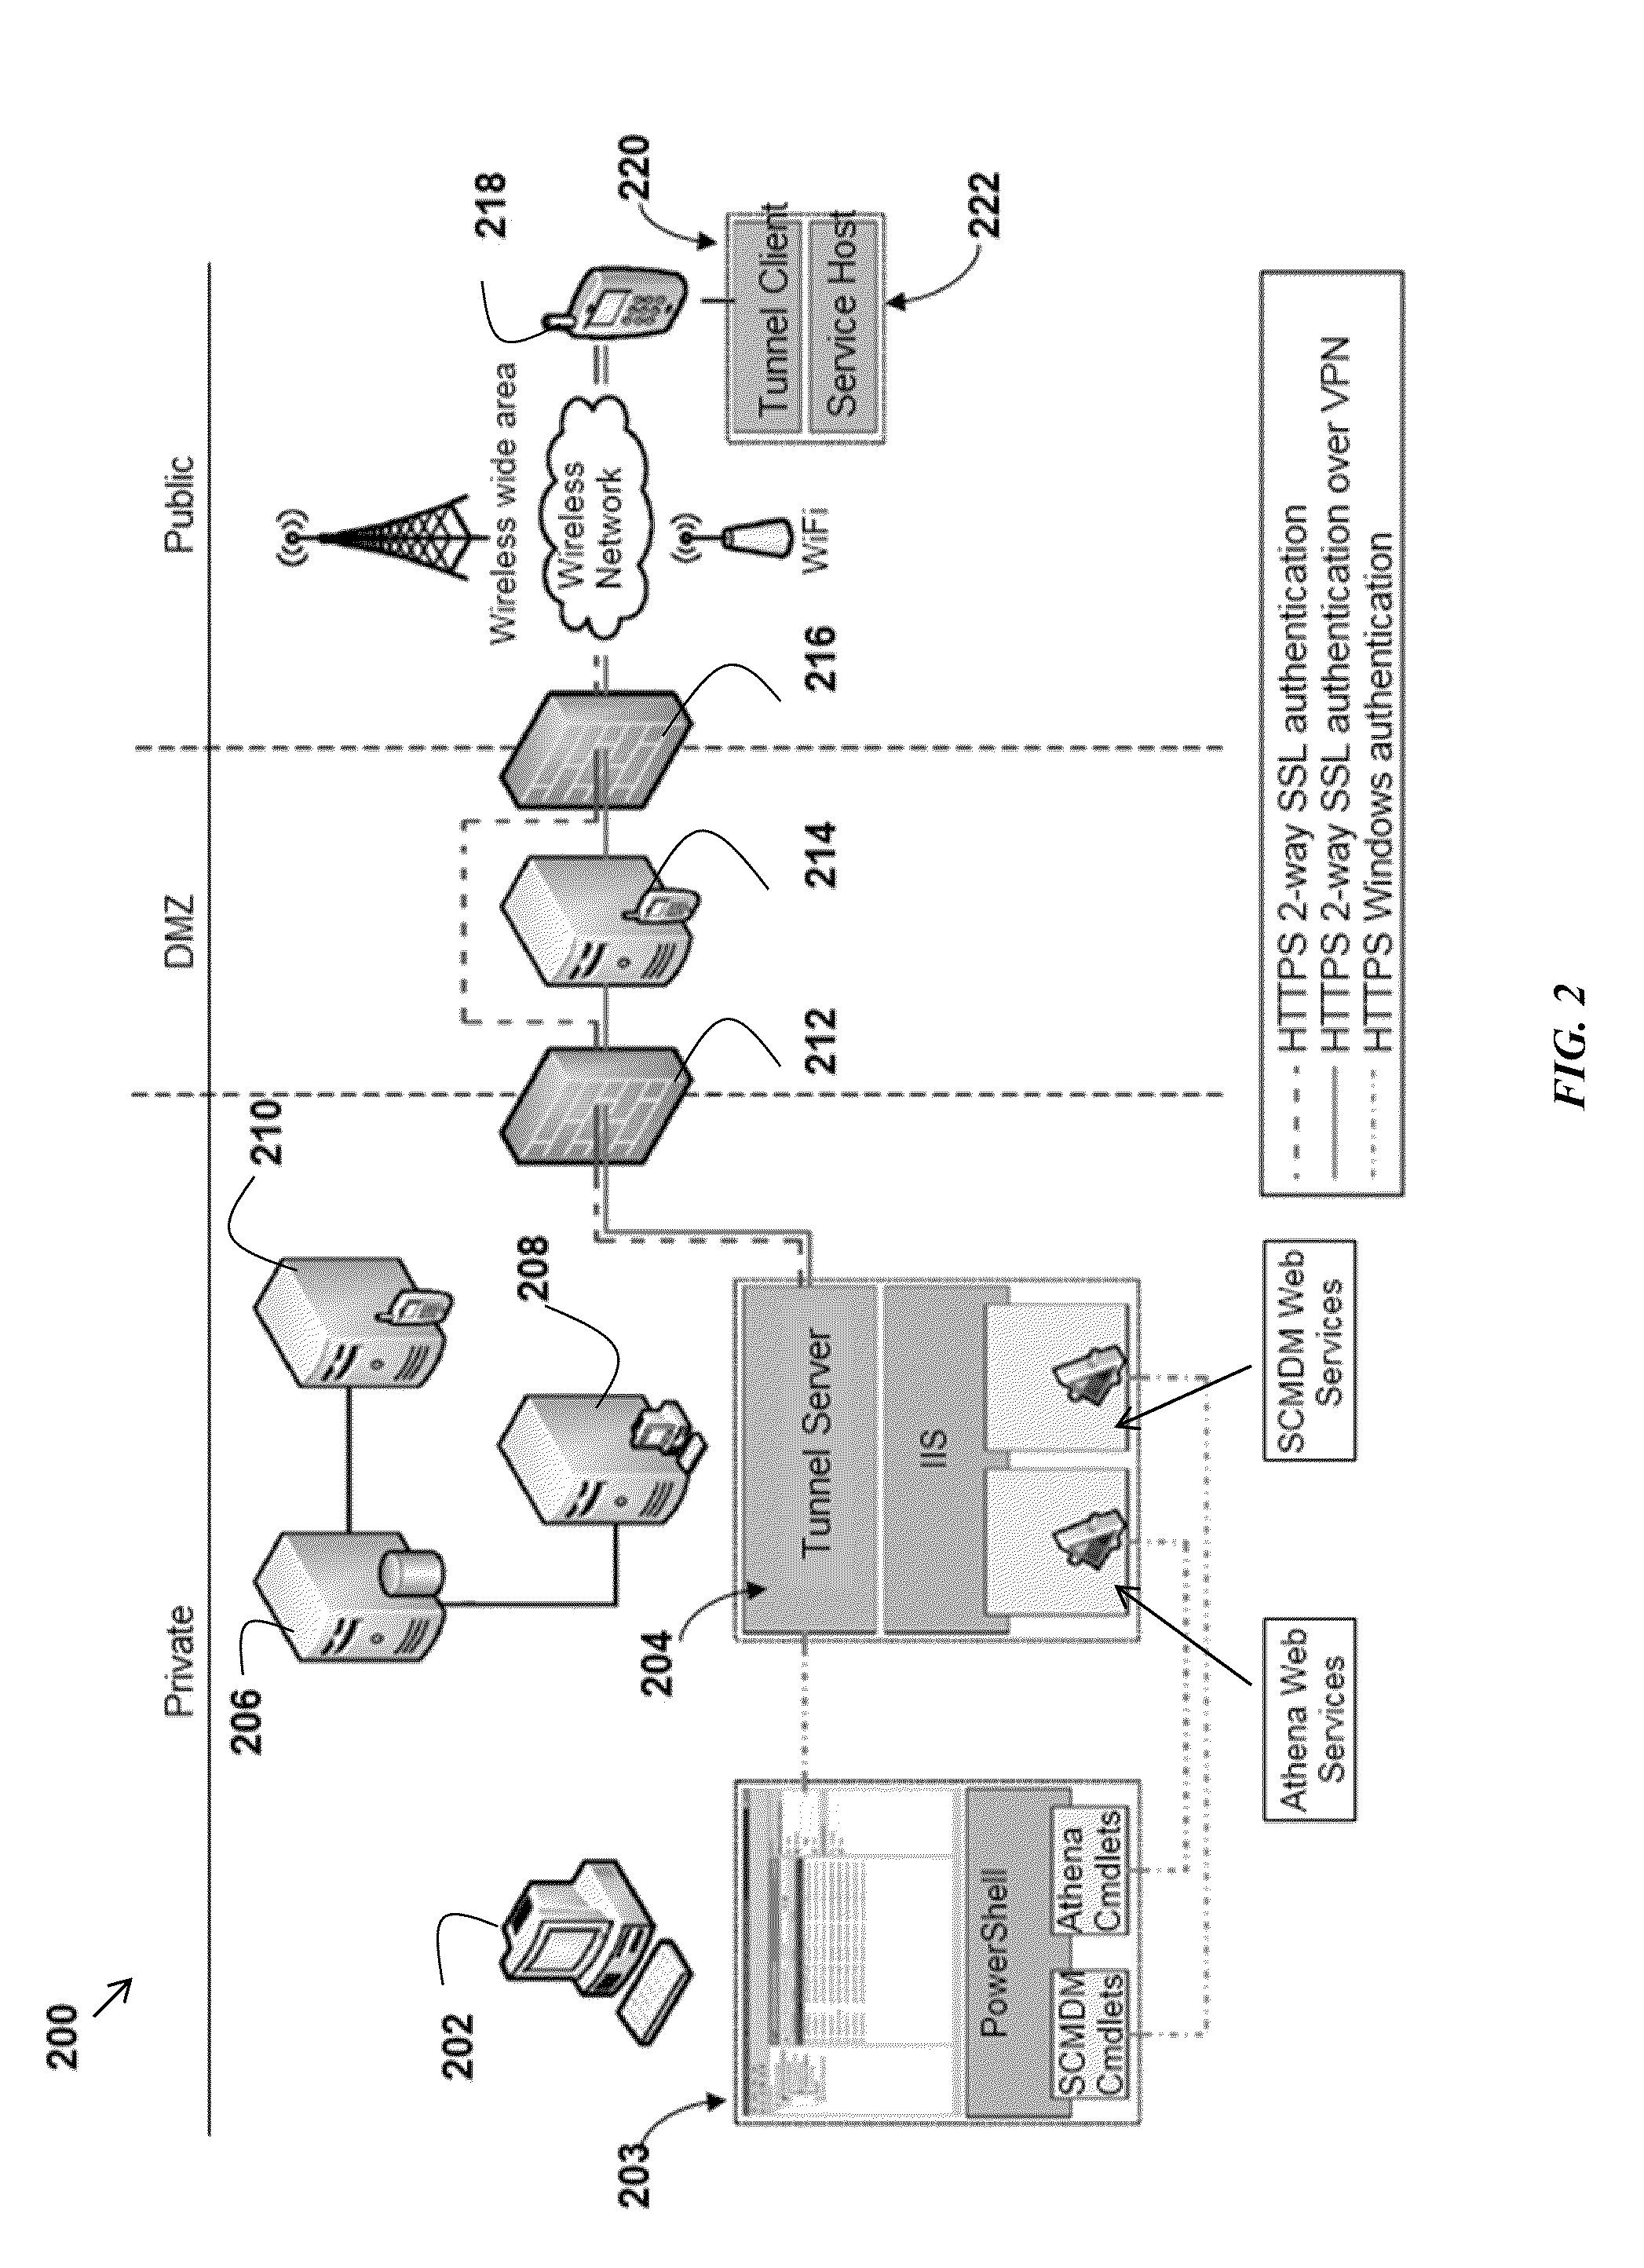 Method, system, and computer readable medium for provisioning and remote distribution